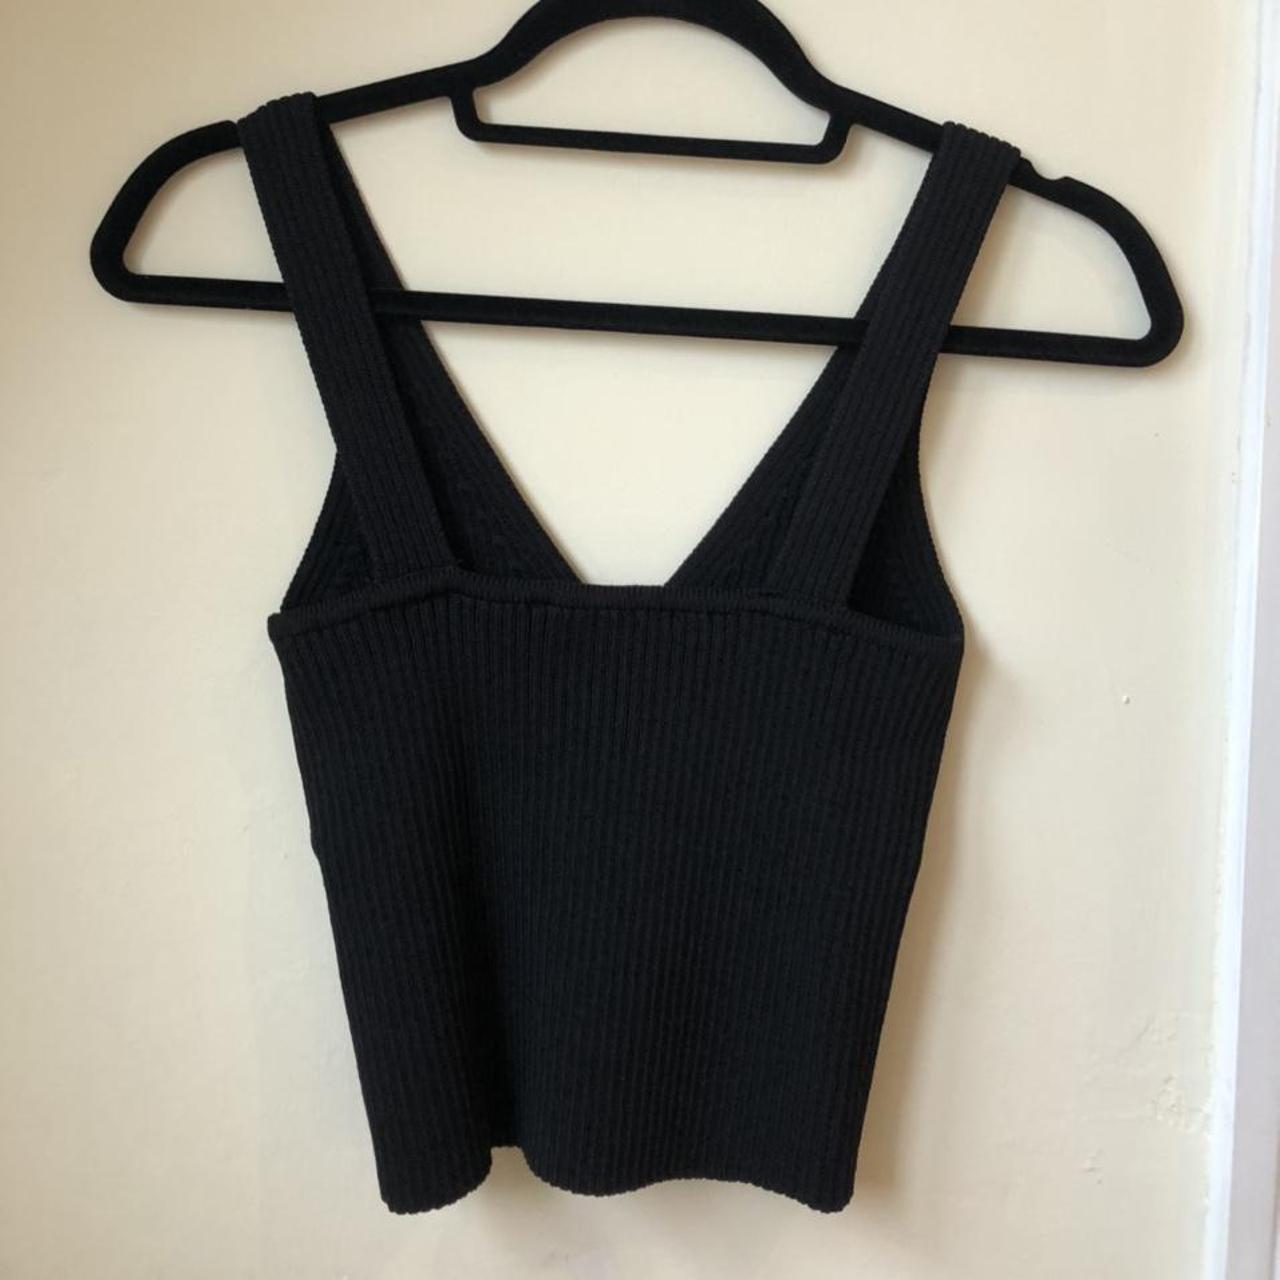 Product Image 2 - Ribbed, fitted black top with